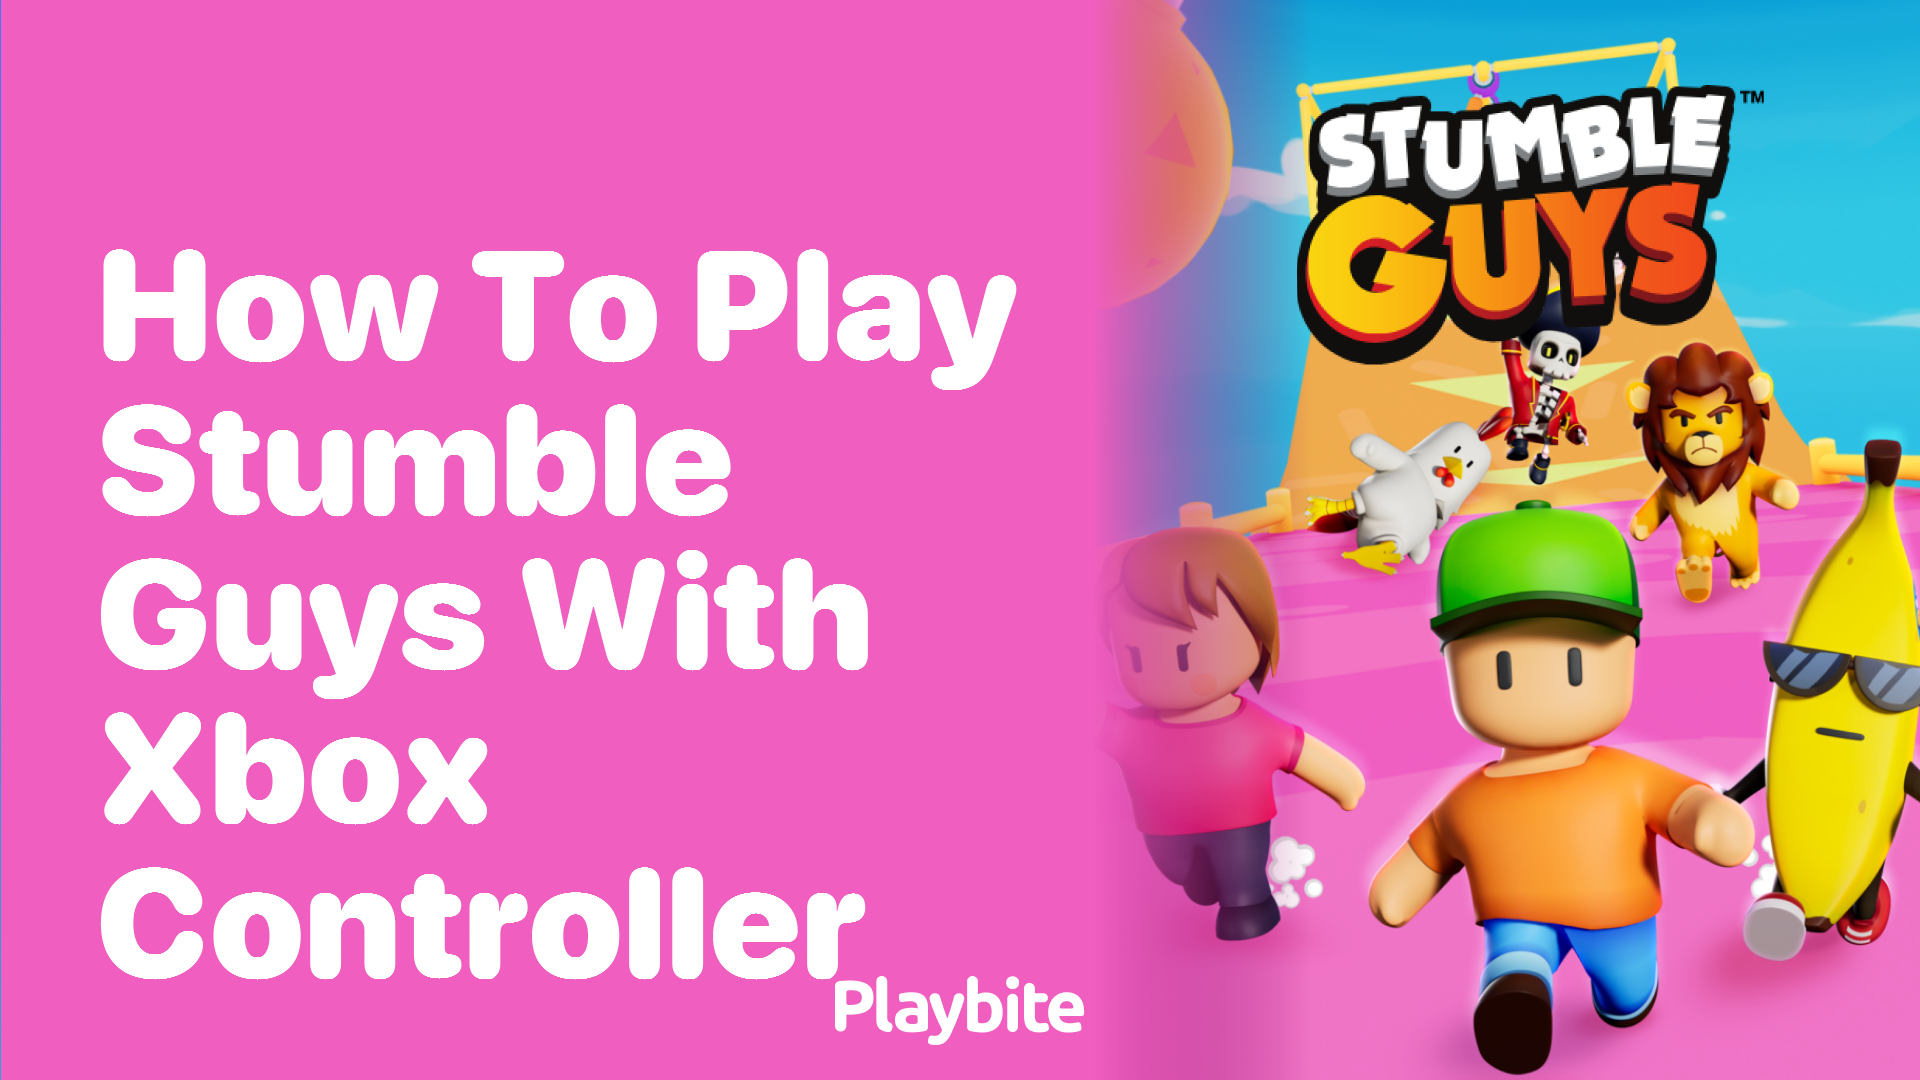 How to Play Stumble Guys with an Xbox Controller